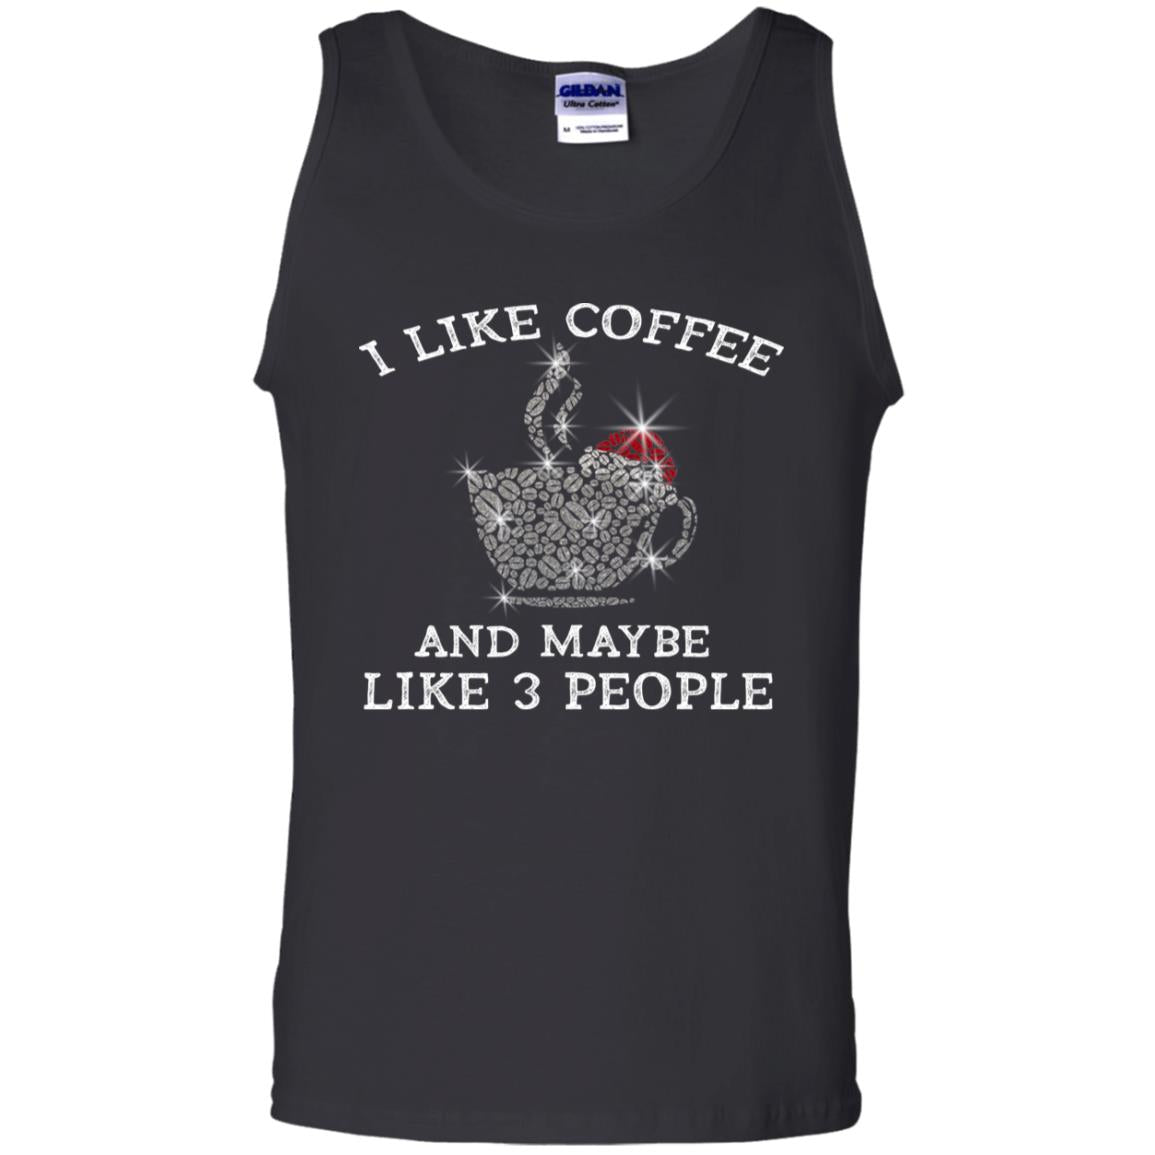 I Like Coffee And Maybe Like 3 People Best Quote Tshirt For Coffee LoversG220 Gildan 100% Cotton Tank Top